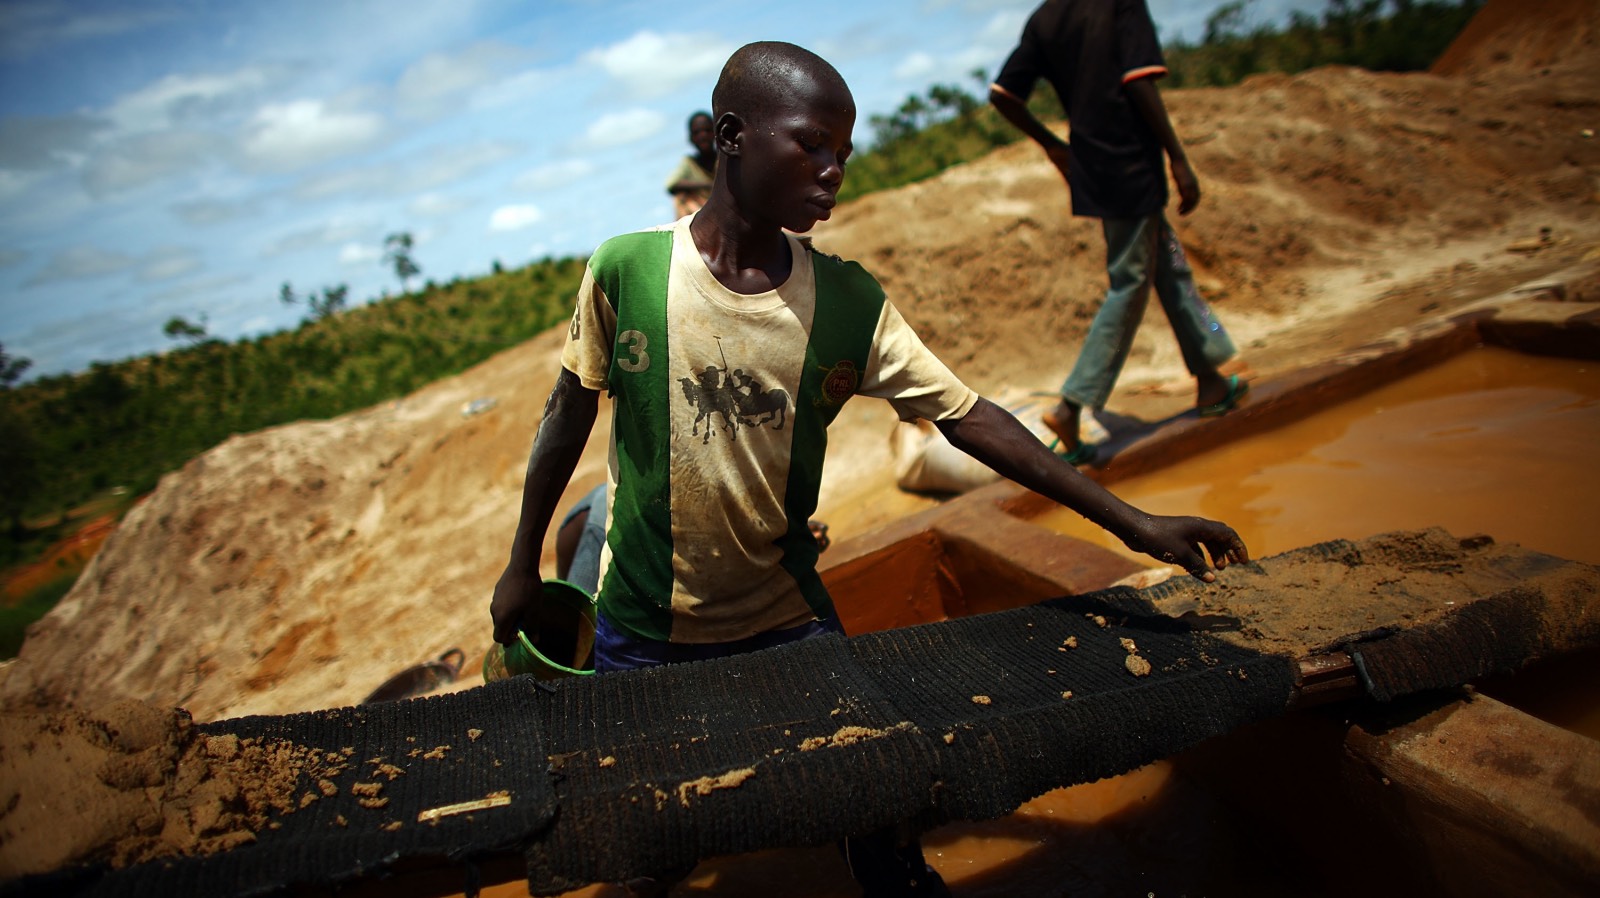 Zamfara A boy works at an illegal gold mine in northern Nigeria. Lead from these mines has sickened thousands of children in the region. | North Country Public Radio